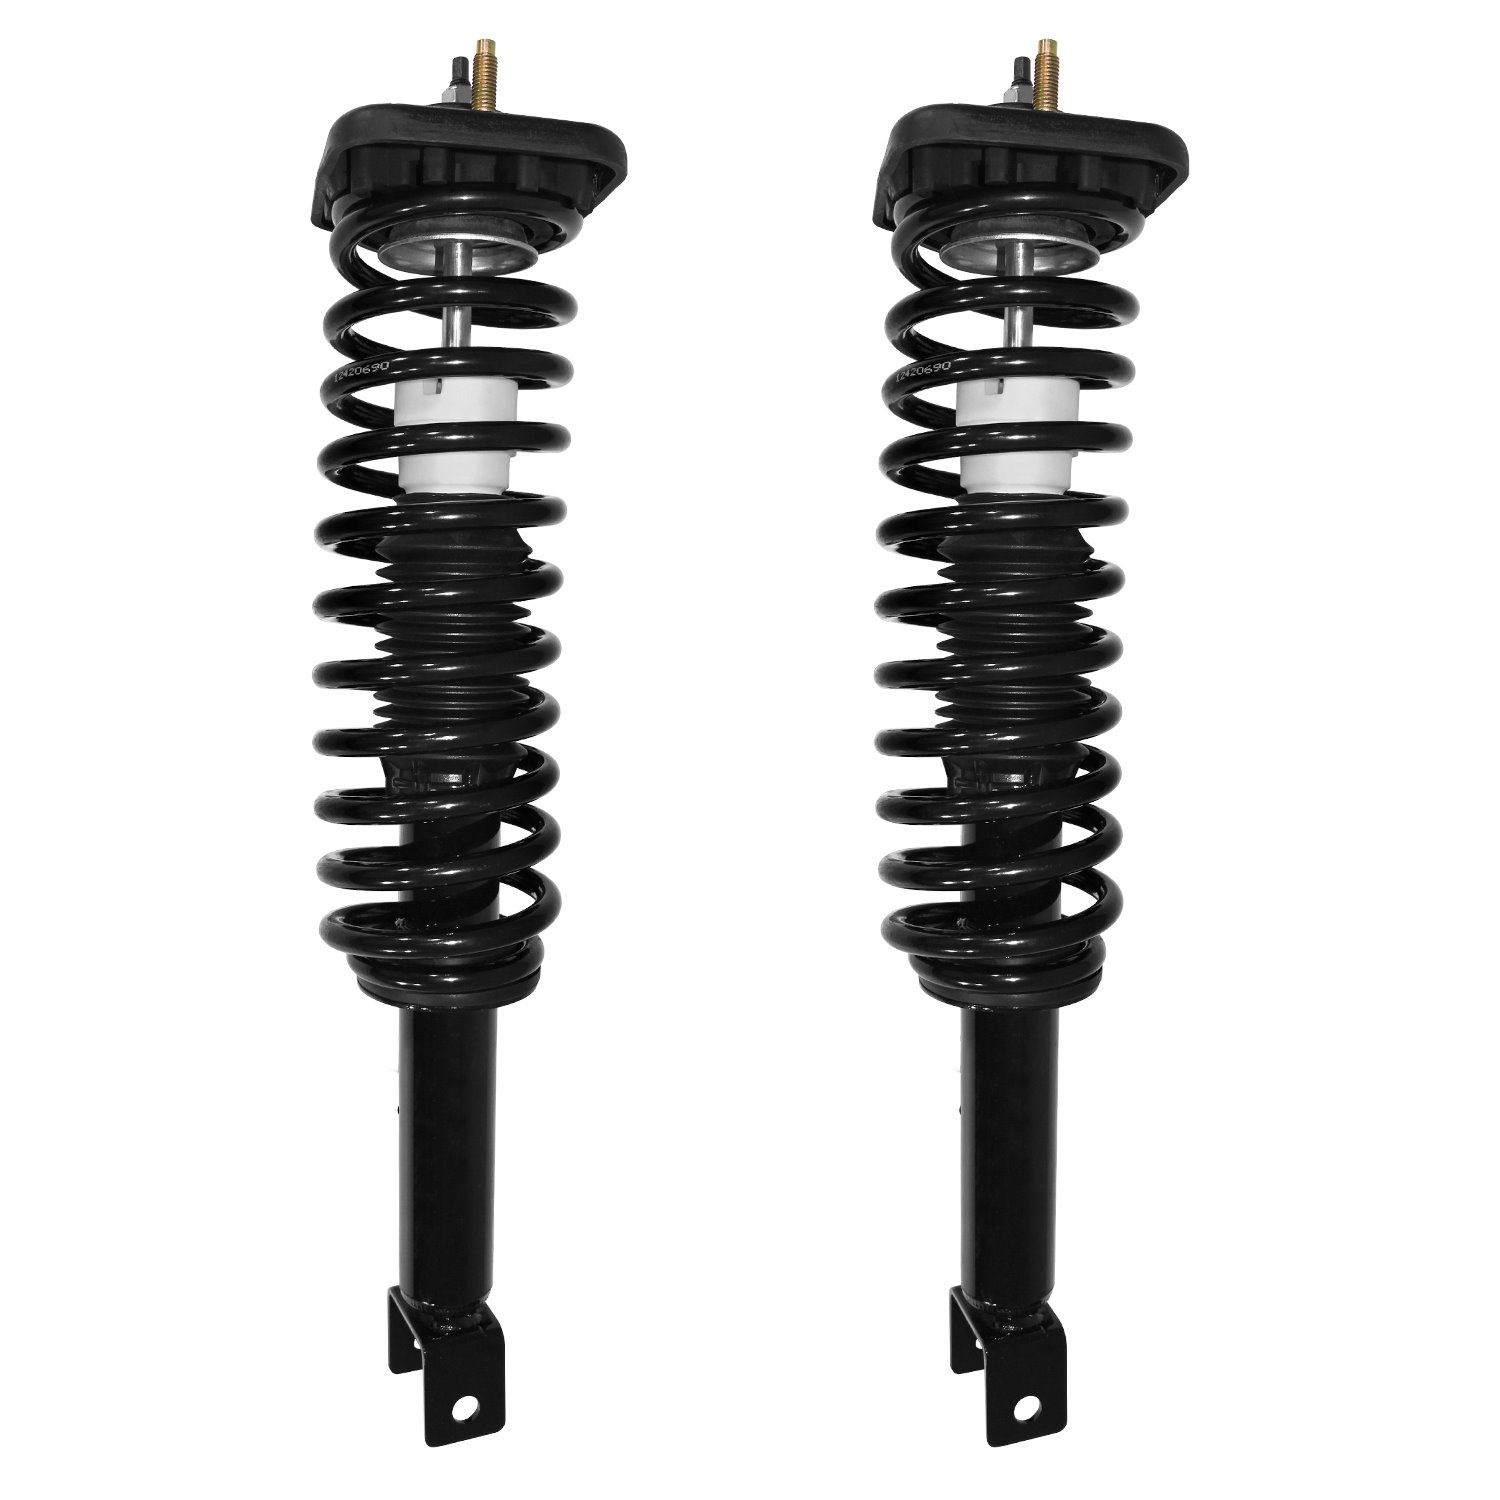 2-15360-001 Suspension Strut & Coil Spring Assembly Set Fits Select Chrysler Cirrus, Dodge Stratus, Plymouth Breeze